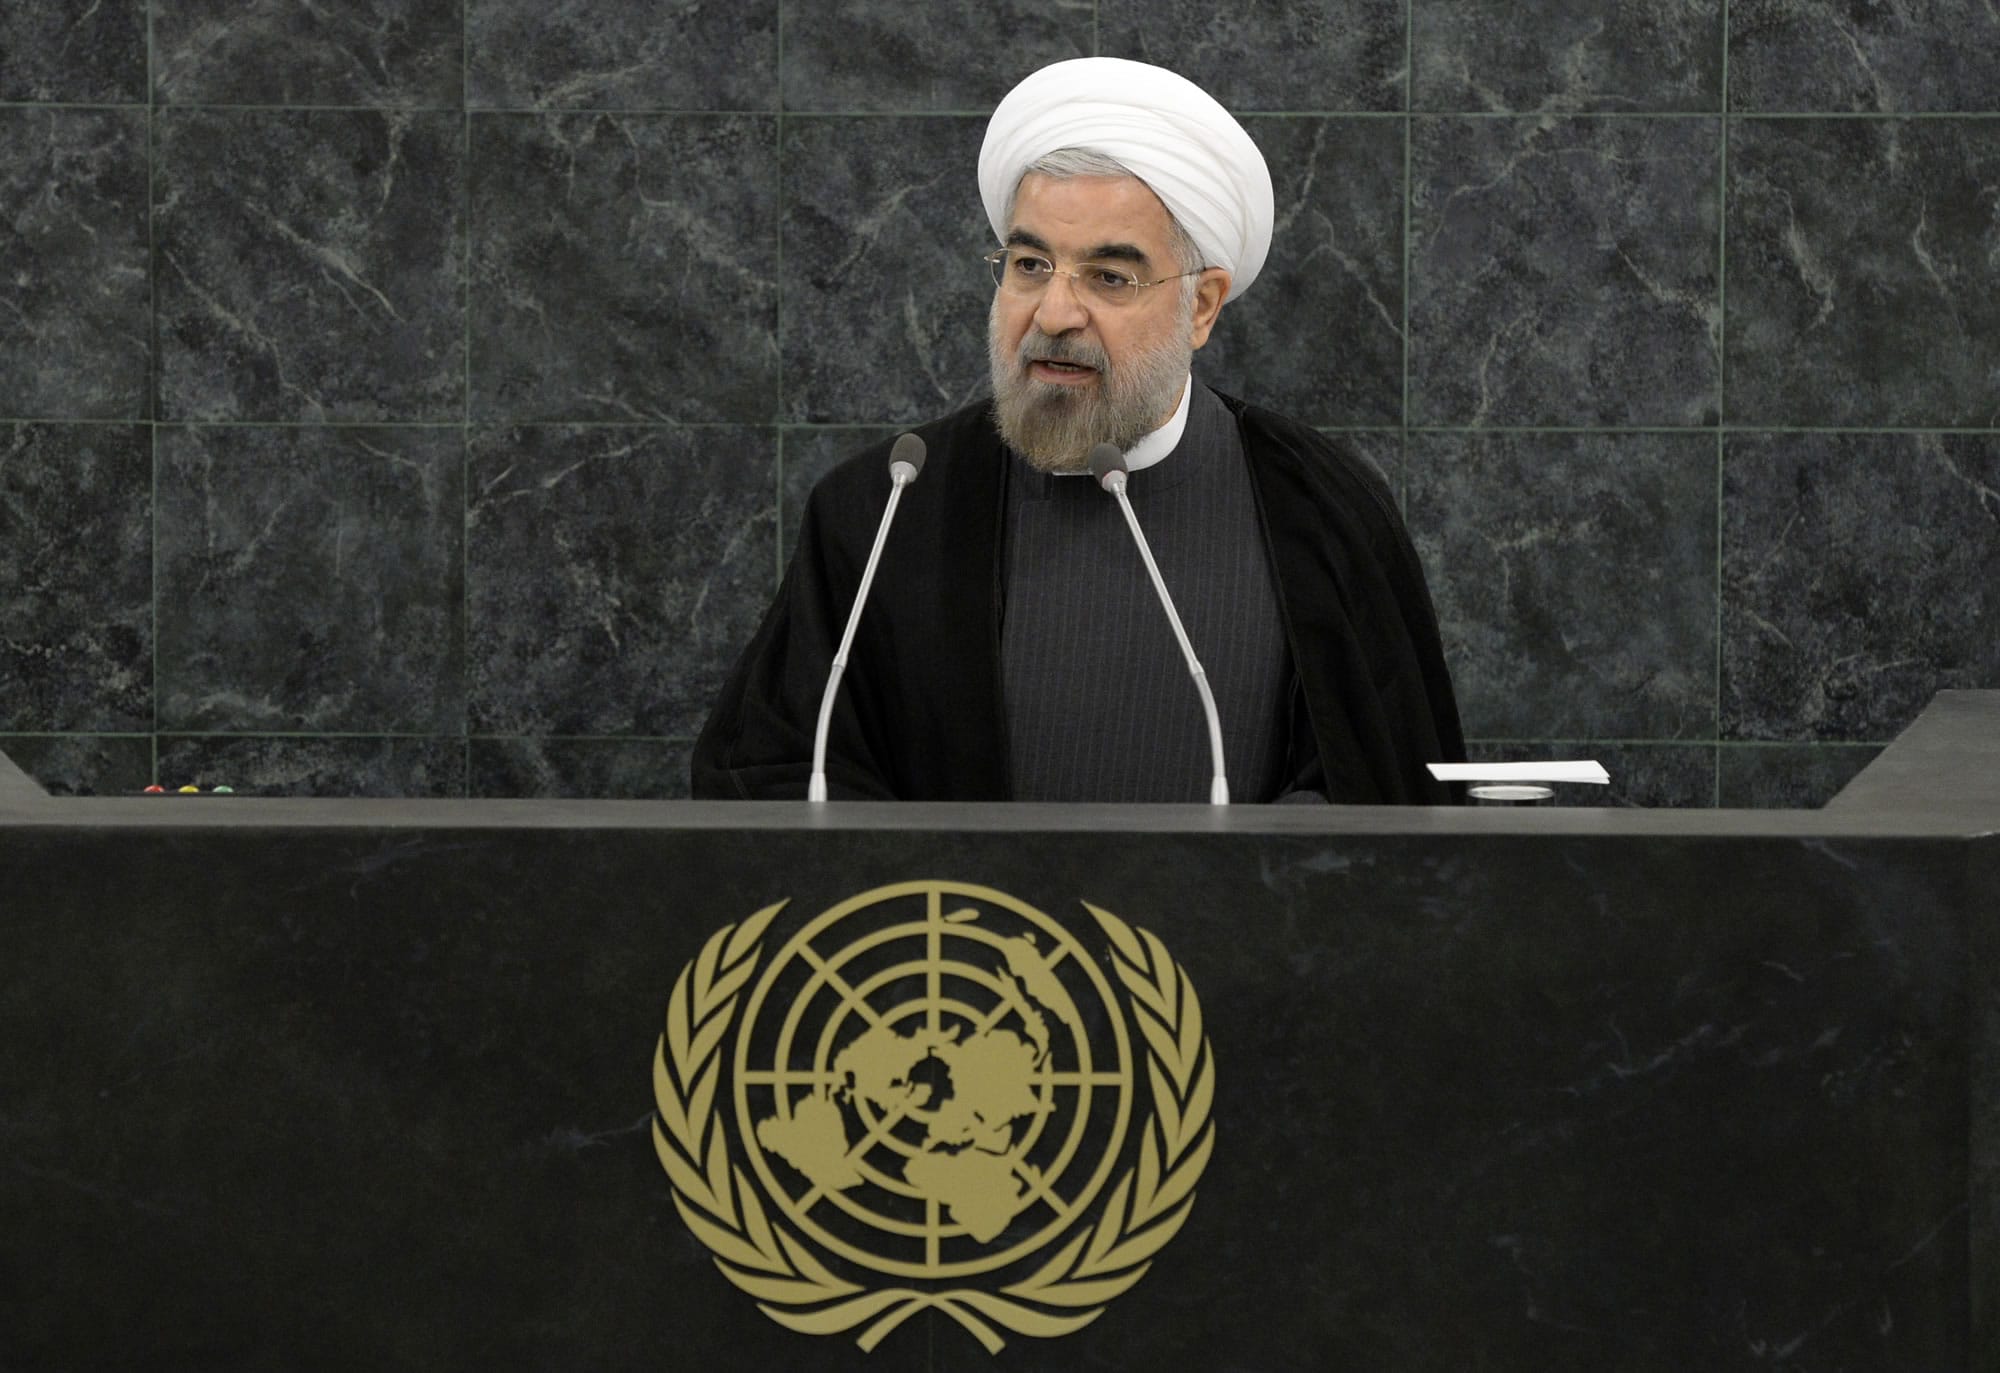 Iranian President Hassan Rouhani addresses a high-level meeting on Nuclear Disarmament during the 68th United Nations General Assembly on Thursday at U.N.